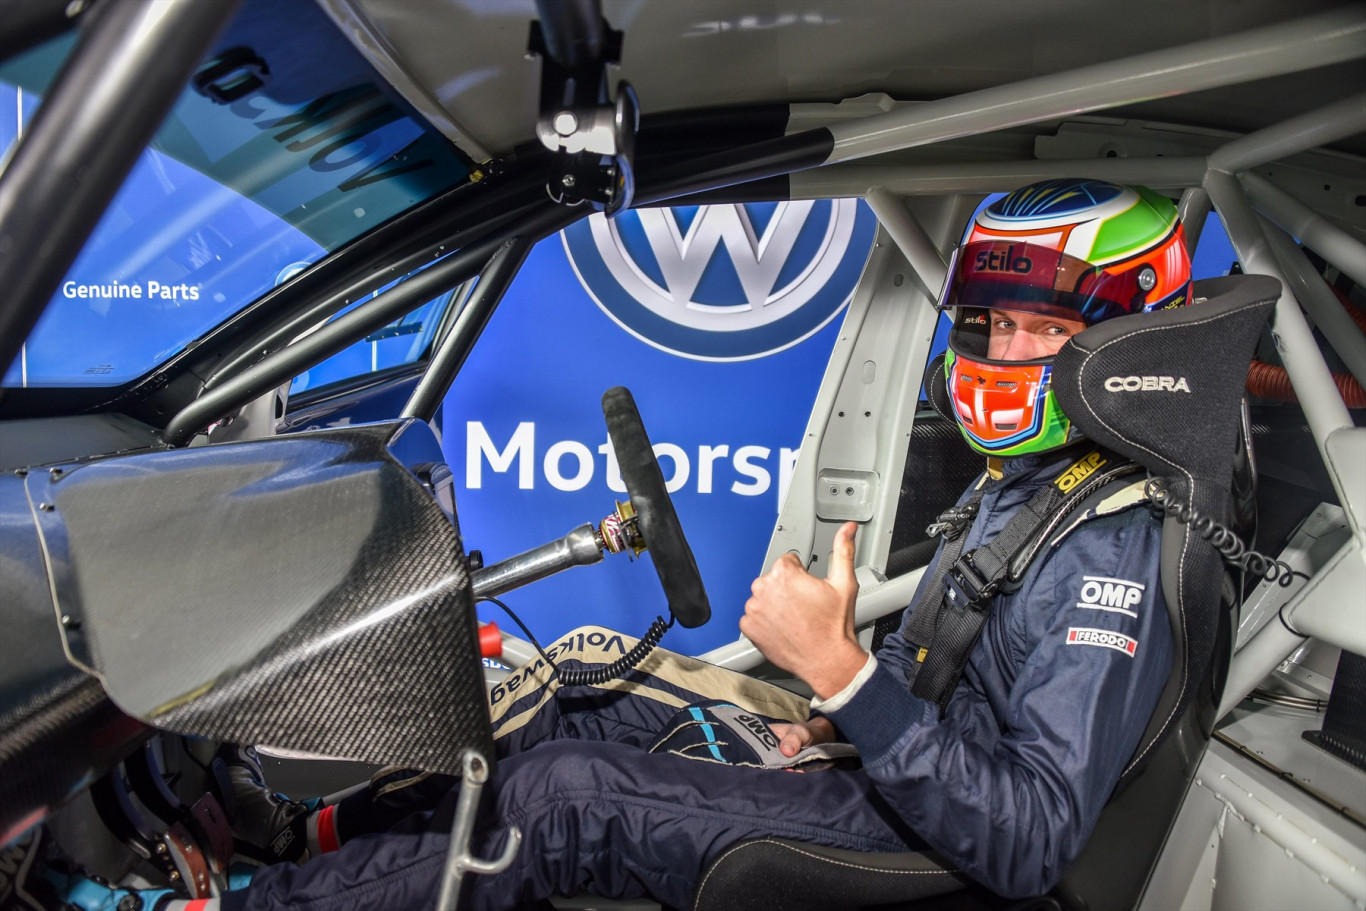 Volkswagen aiming to extend advantage at the top of the GTC series points table